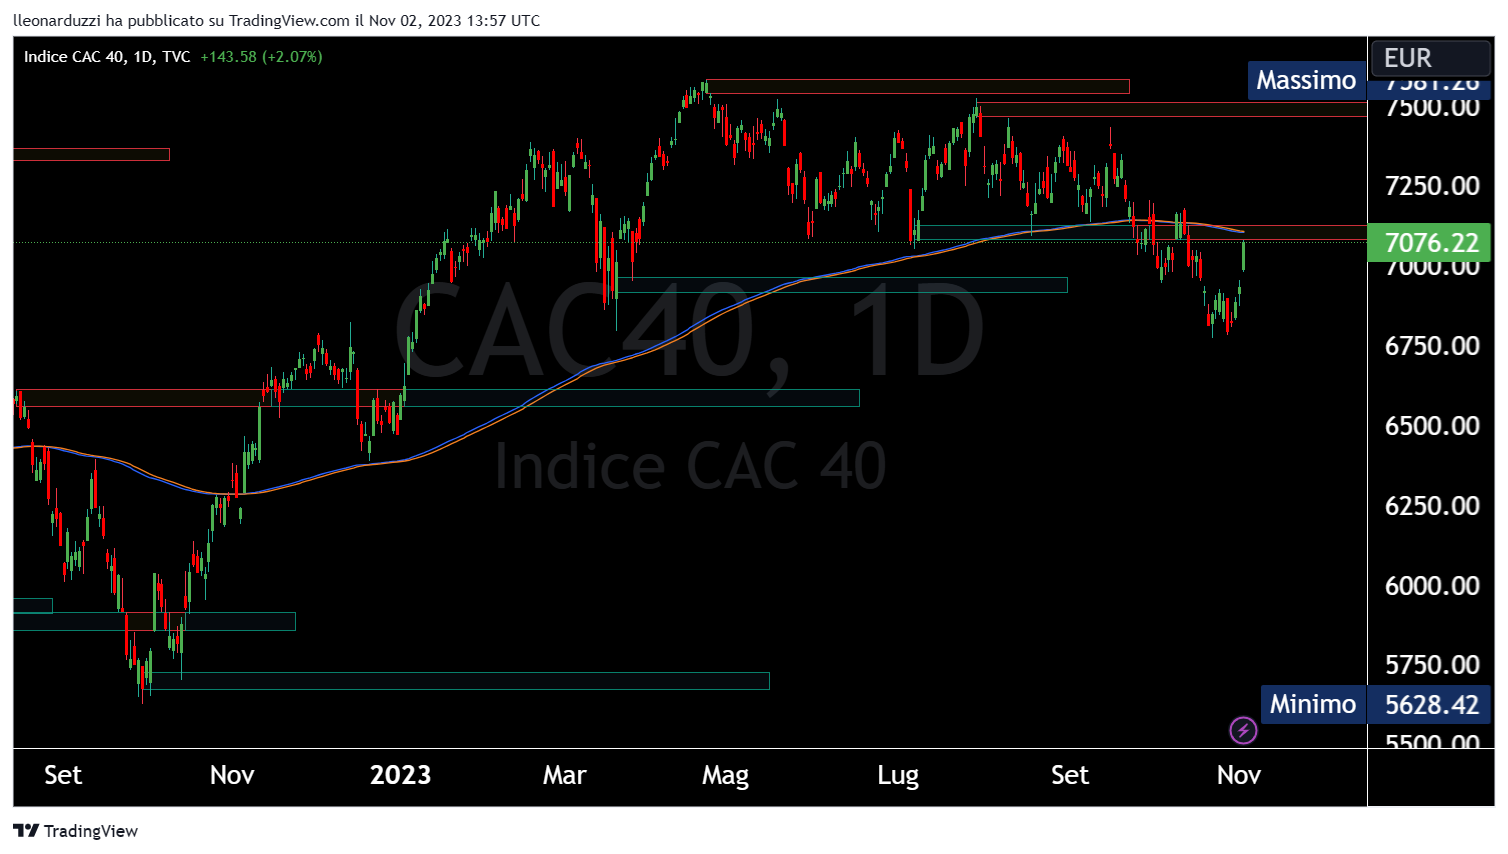 CAC40_2023-11-02_14-57-00.png